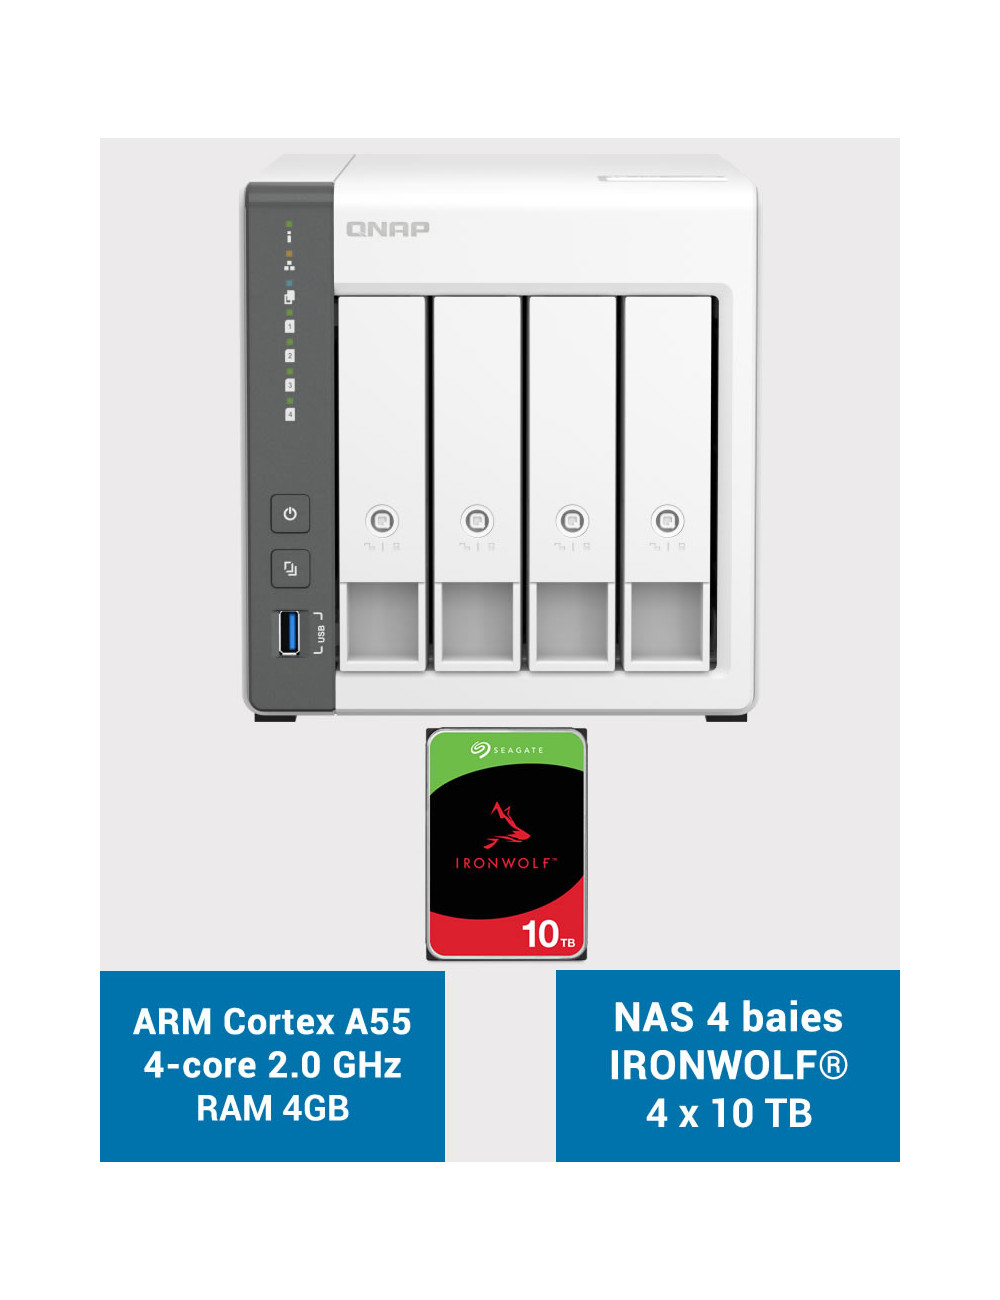 QNAP TS-433 4GB Serveur NAS IRONWOLF 40To (4x10To)